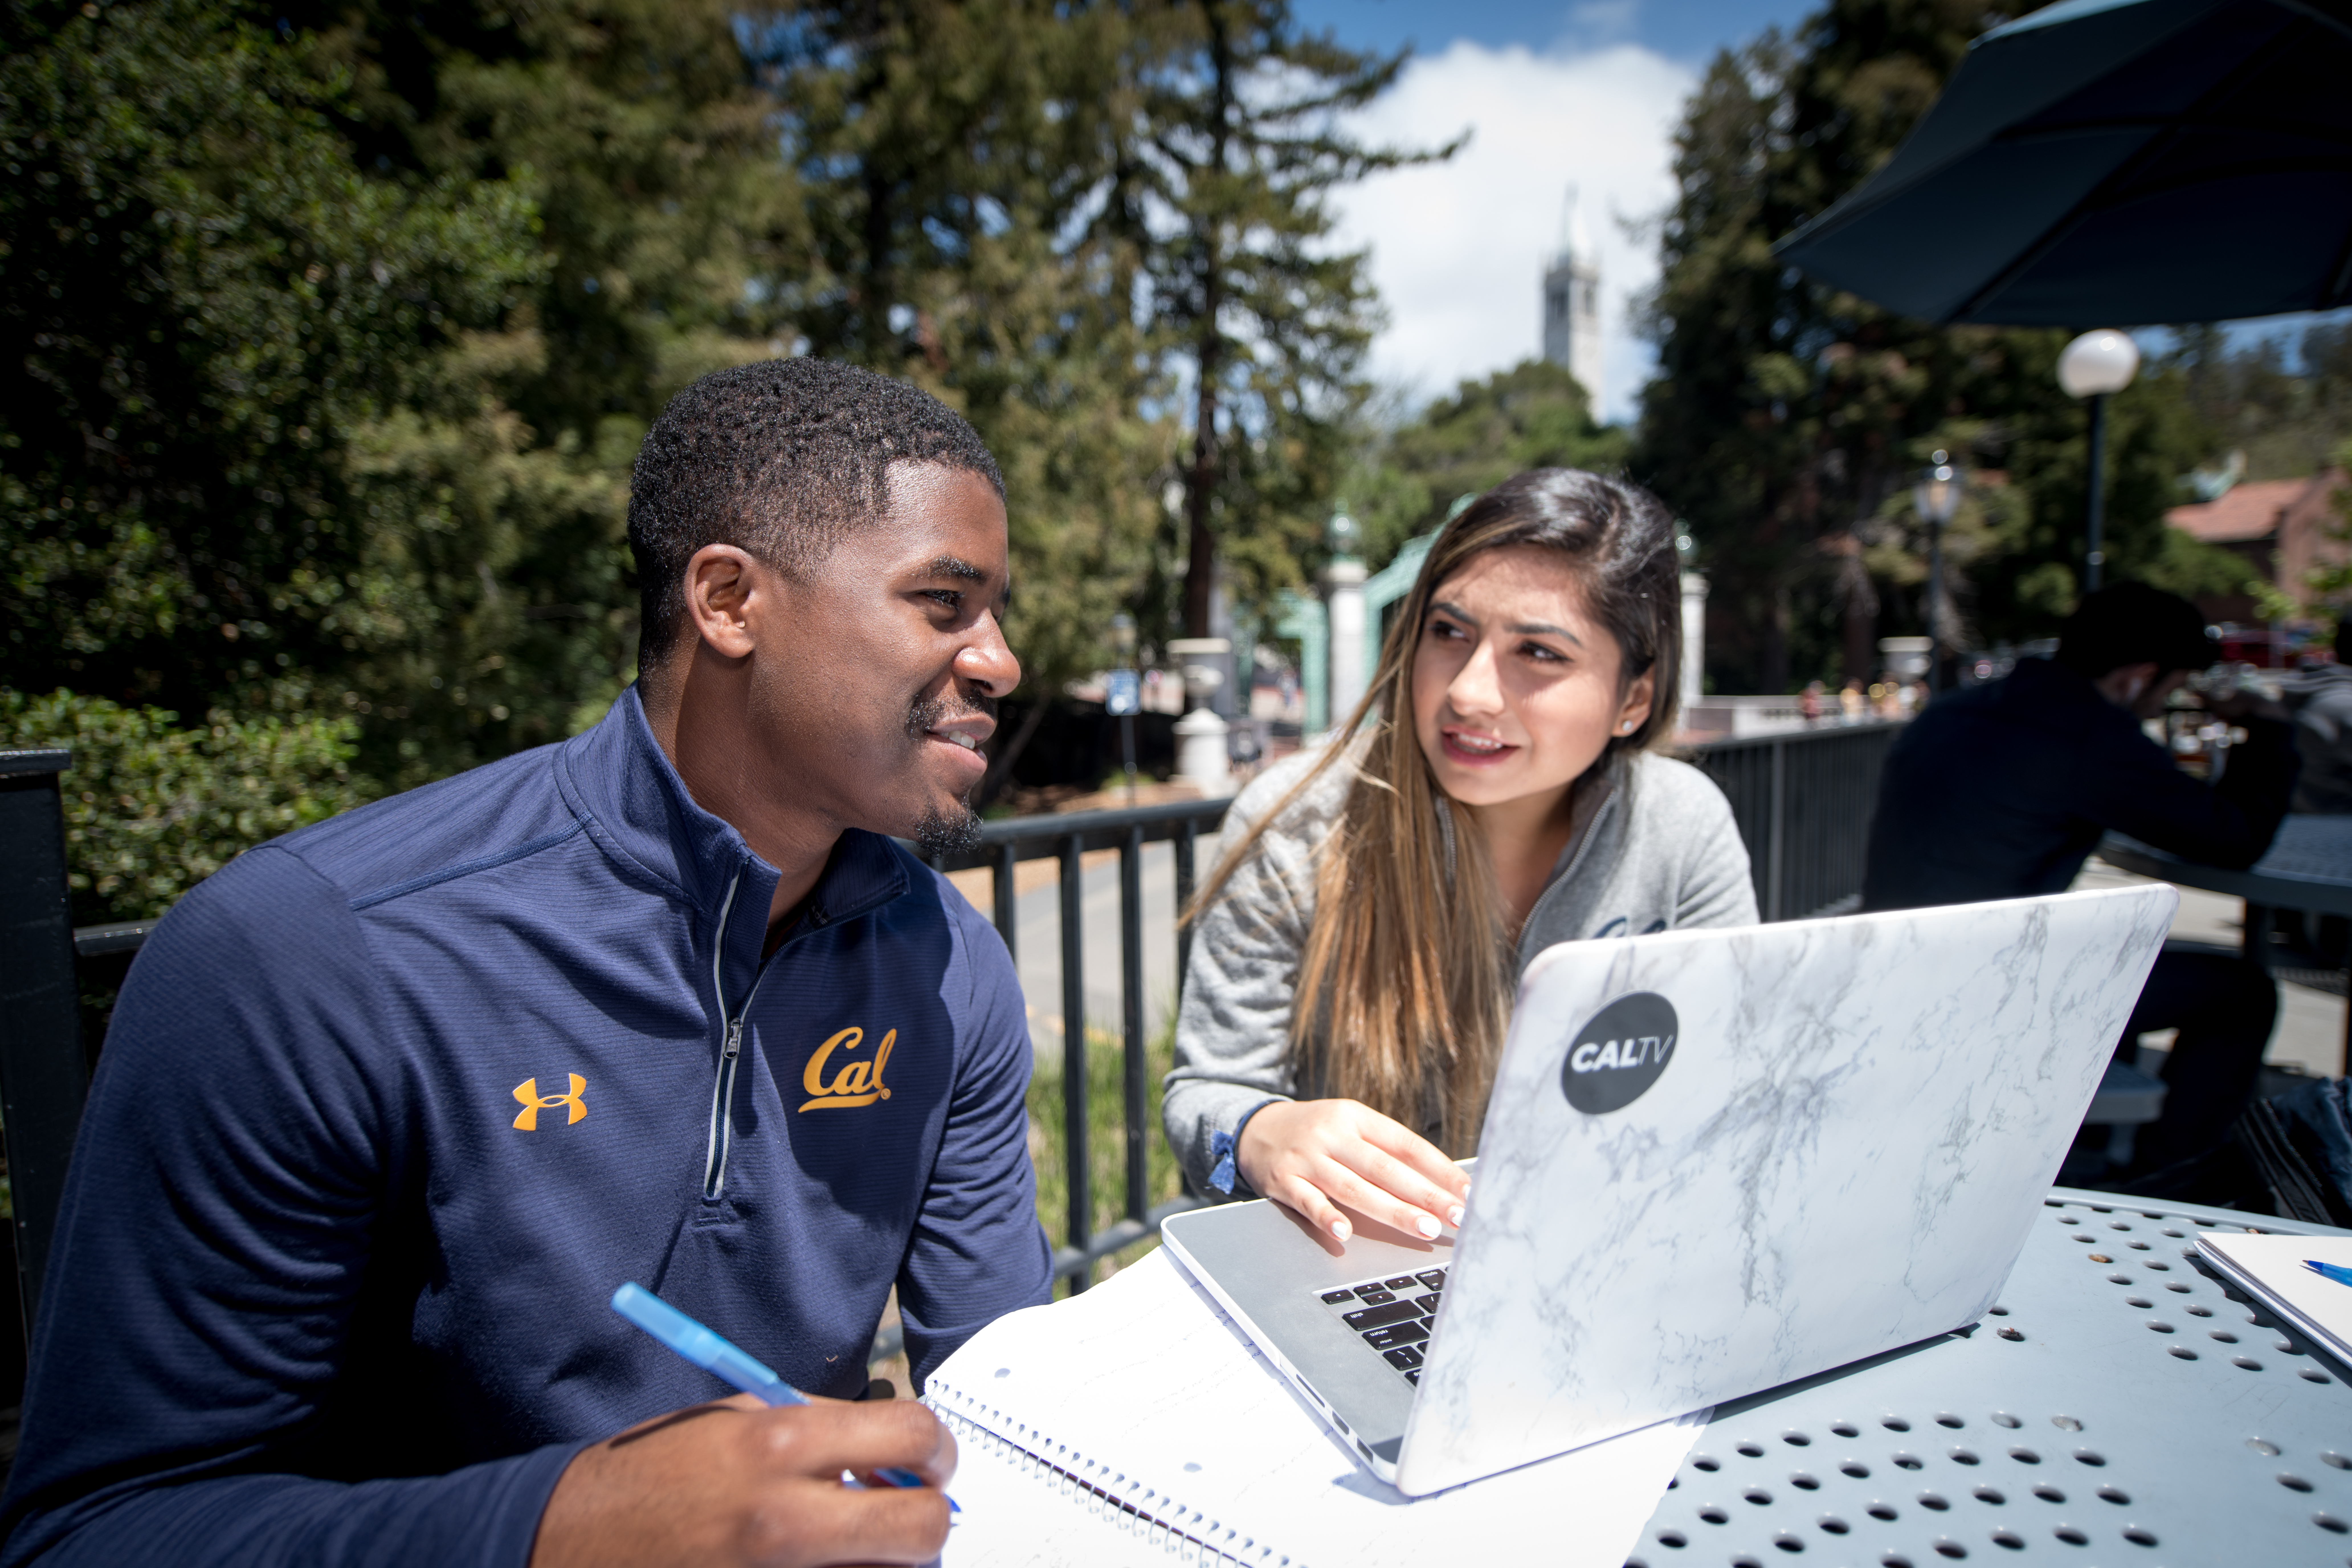 Two Berkeley students studying together outside with laptop.